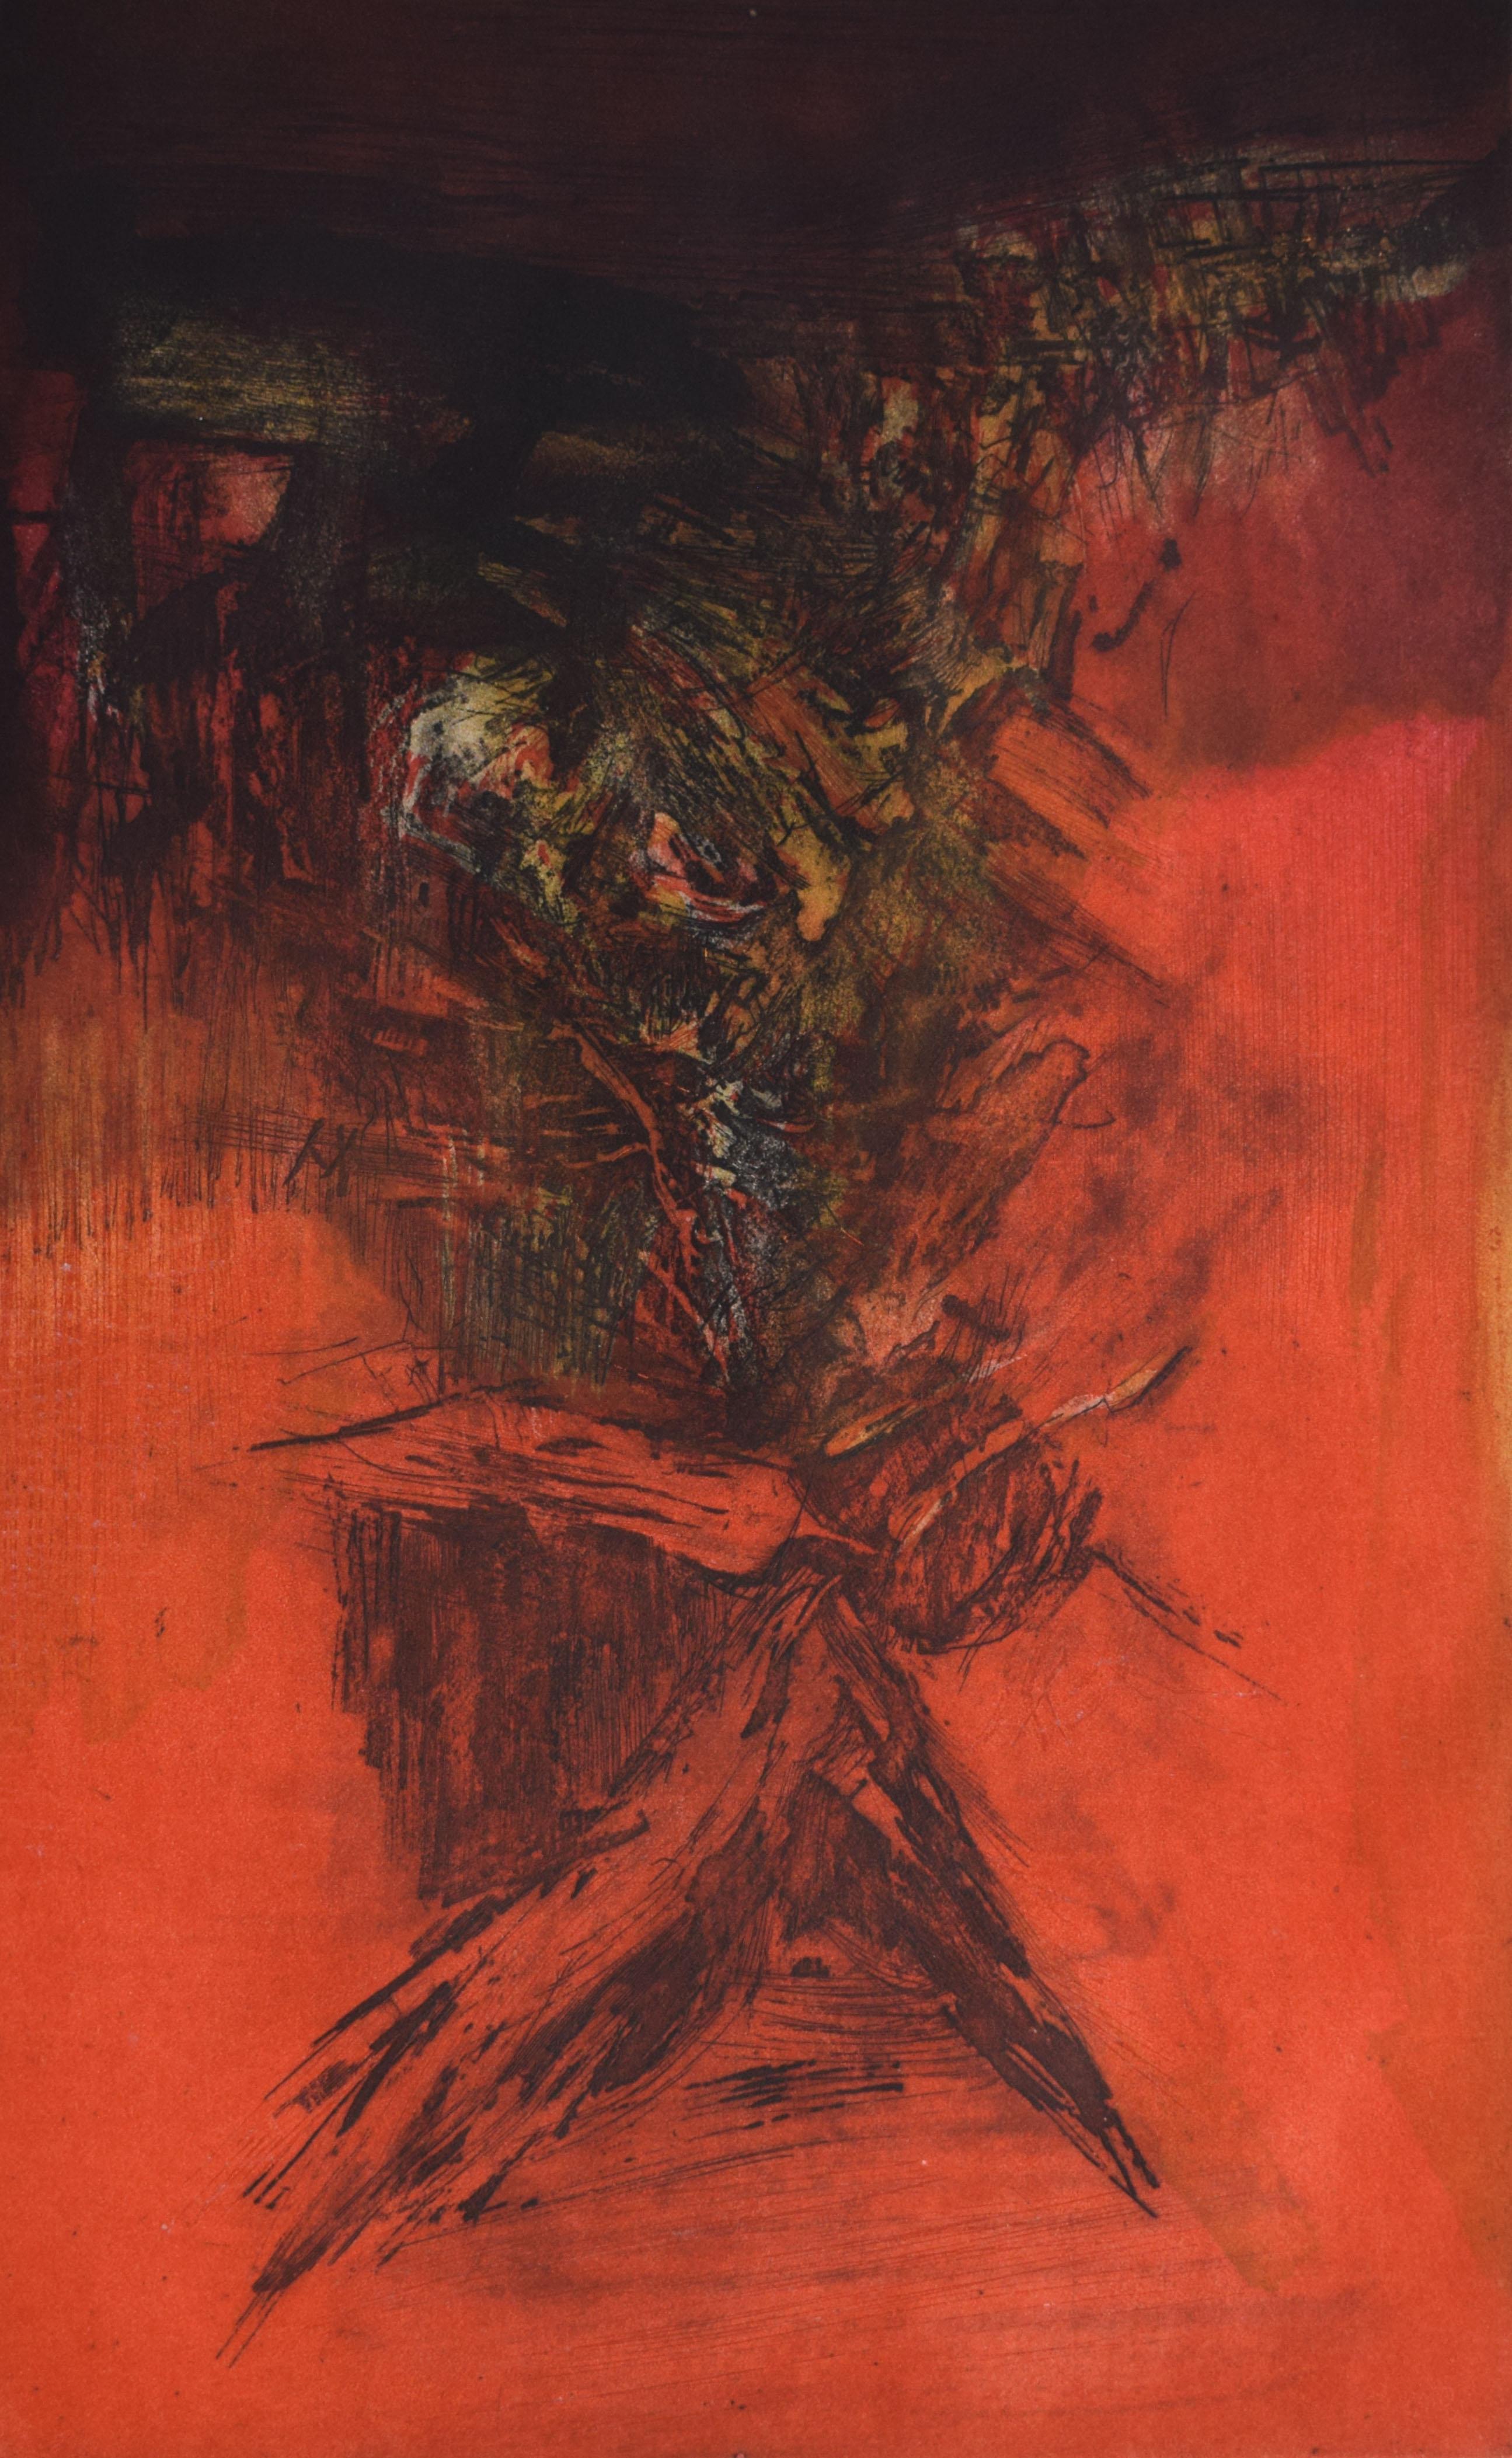 Zao Wou-Ki Abstract Print - Composition I, from: Canto Pisan - Chinese French Canto Literature Abstract